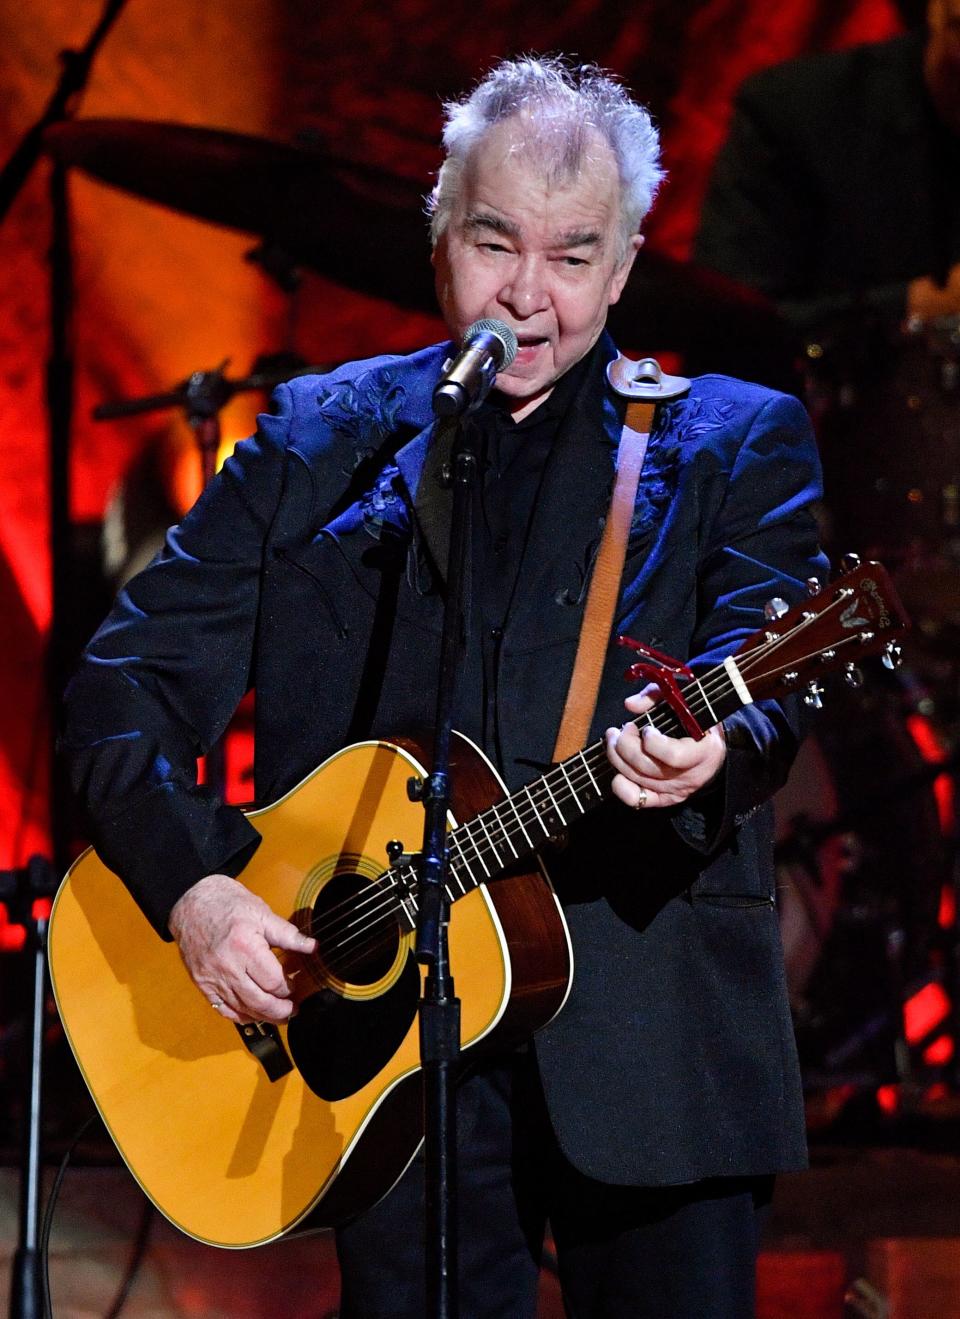 John Prine performs during the 2018 Americana Honors and Awards show at the Ryman Auditorium in Nashville, Tenn., Wednesday, Sept. 12, 2018.